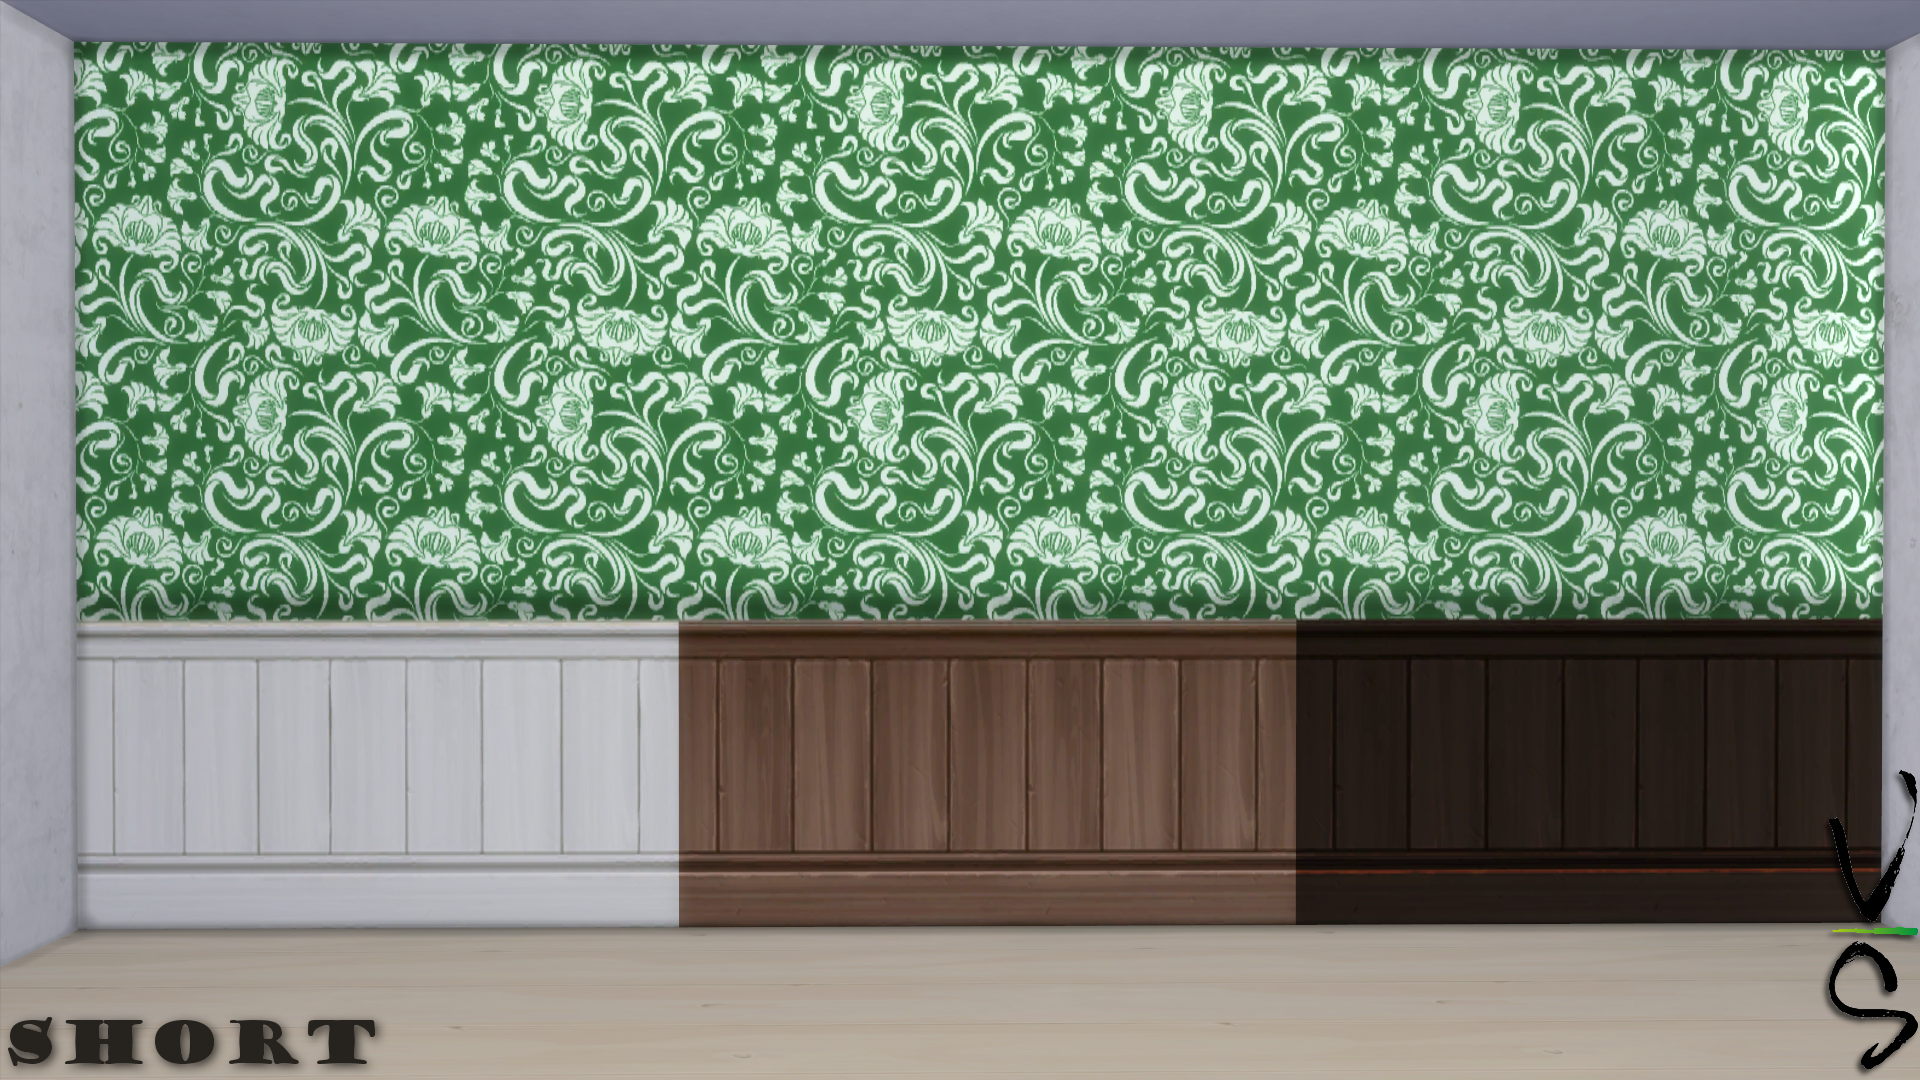 Mod The Sims - Floral Paneling Walls